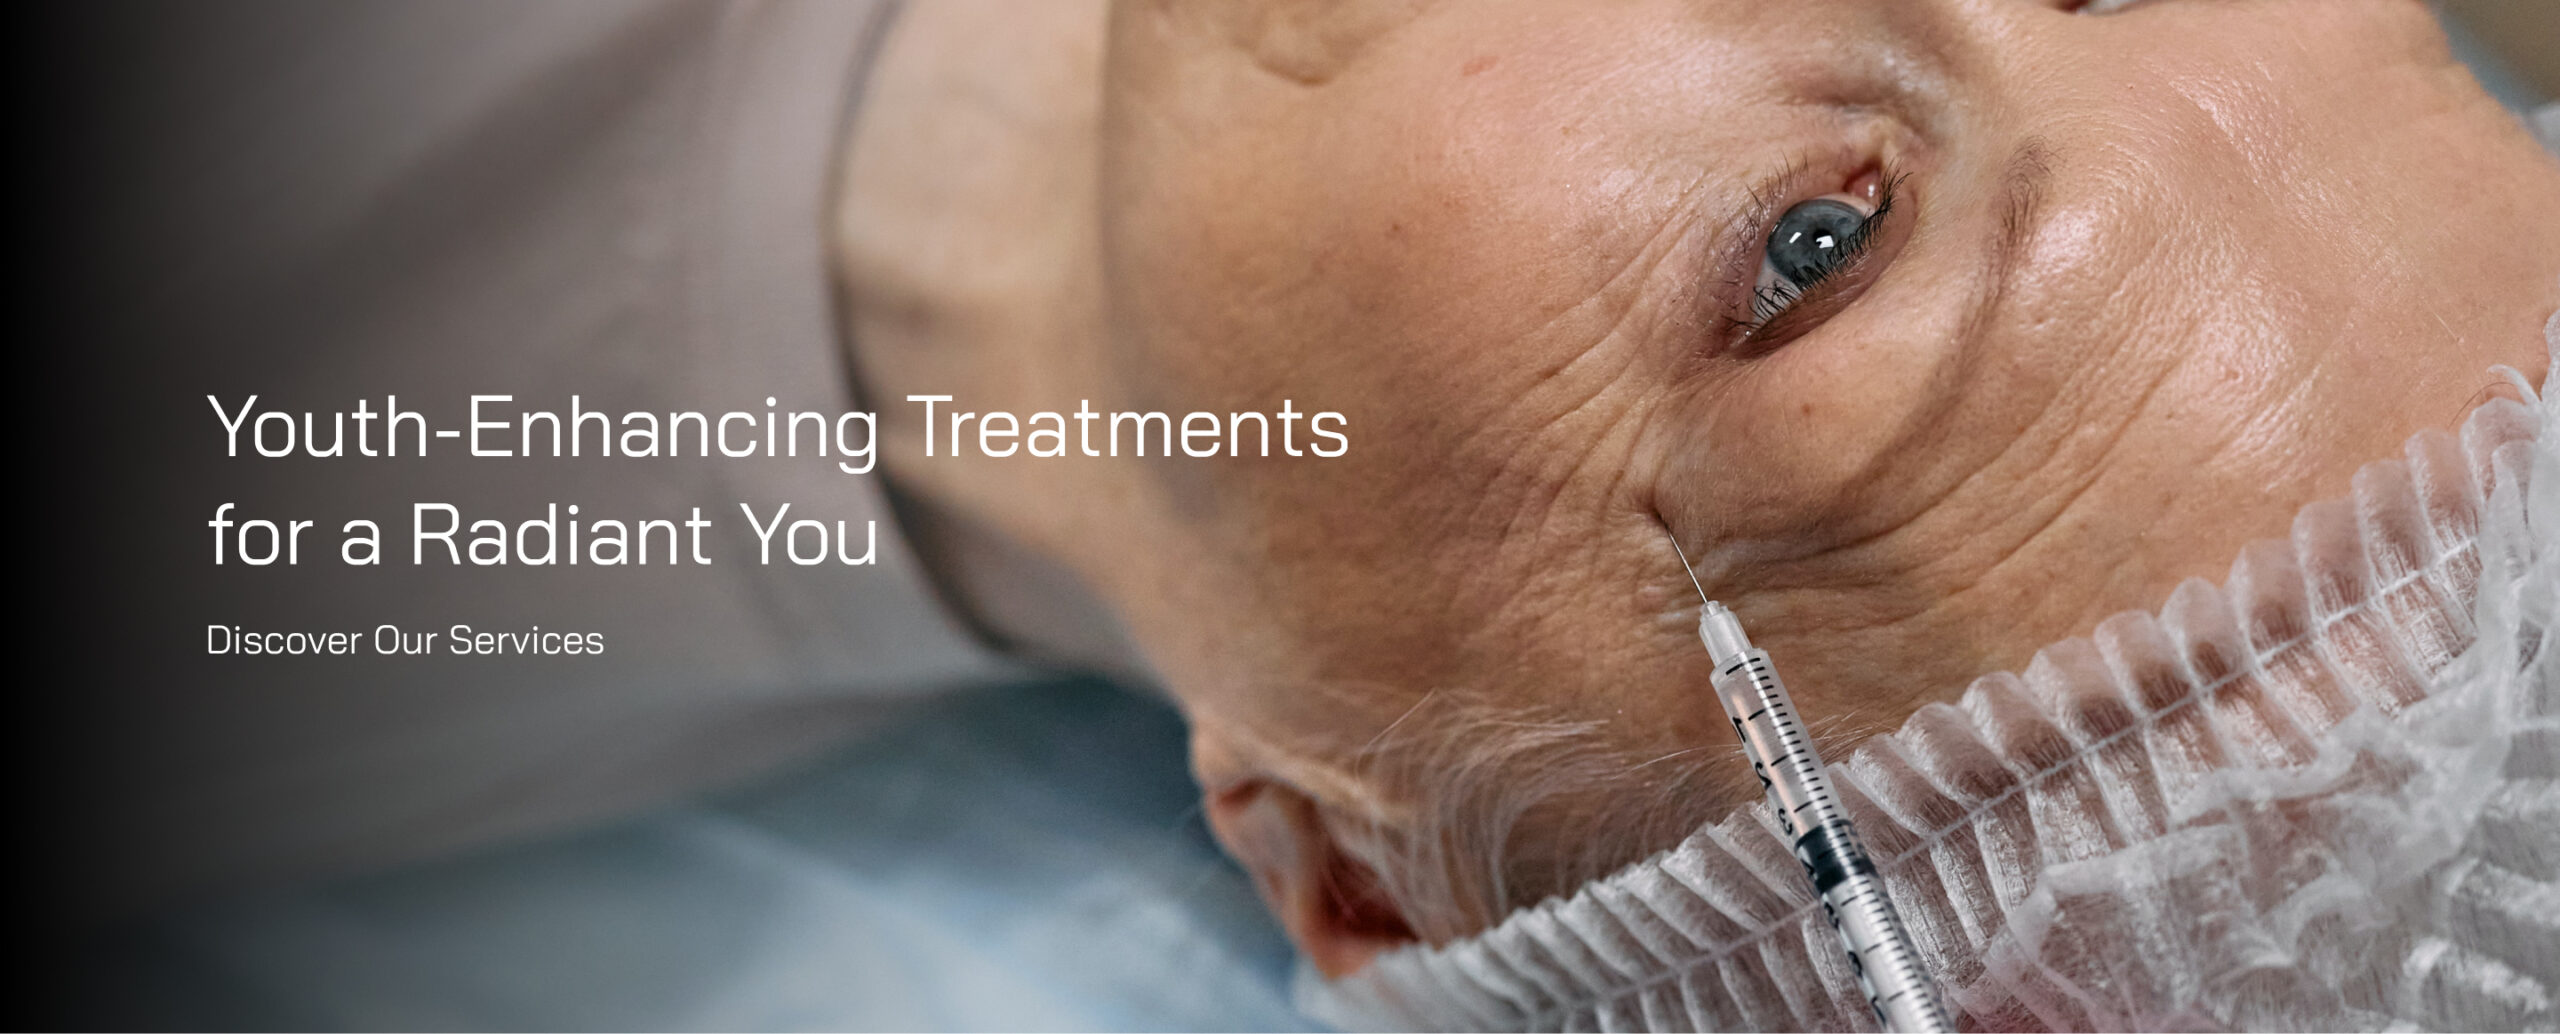 Experience age-defying anti-ageing solutions with Wrinkle Treatment, Dermal Fillers, HIFU Lift, and more at The Skin Firm.